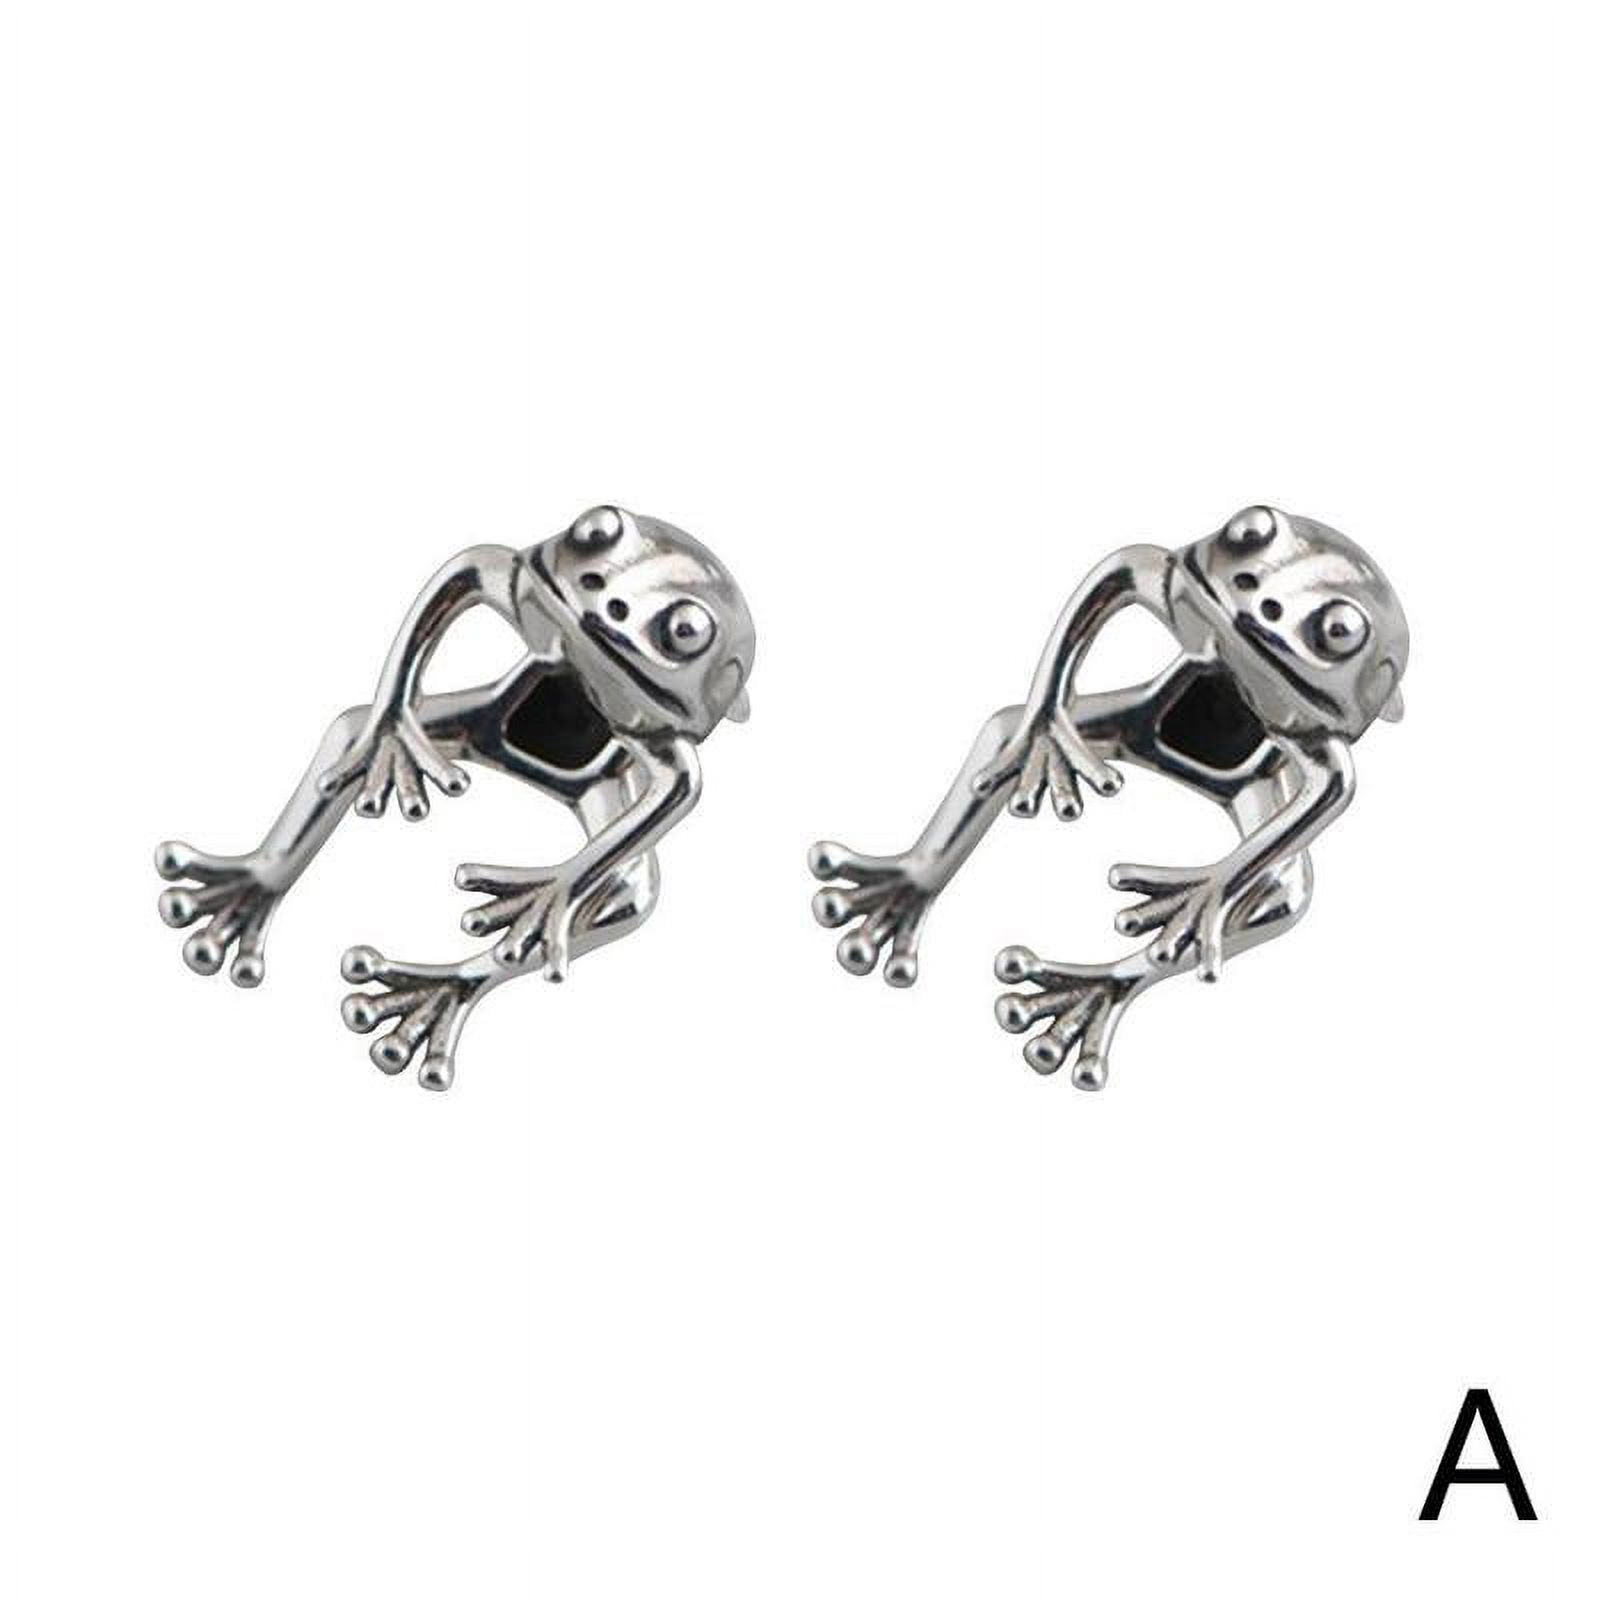 Vintage Gothic Frog Earrings Stud Earring Punk Jewelry Gifts For Women Girl Party Accessories - image 1 of 1